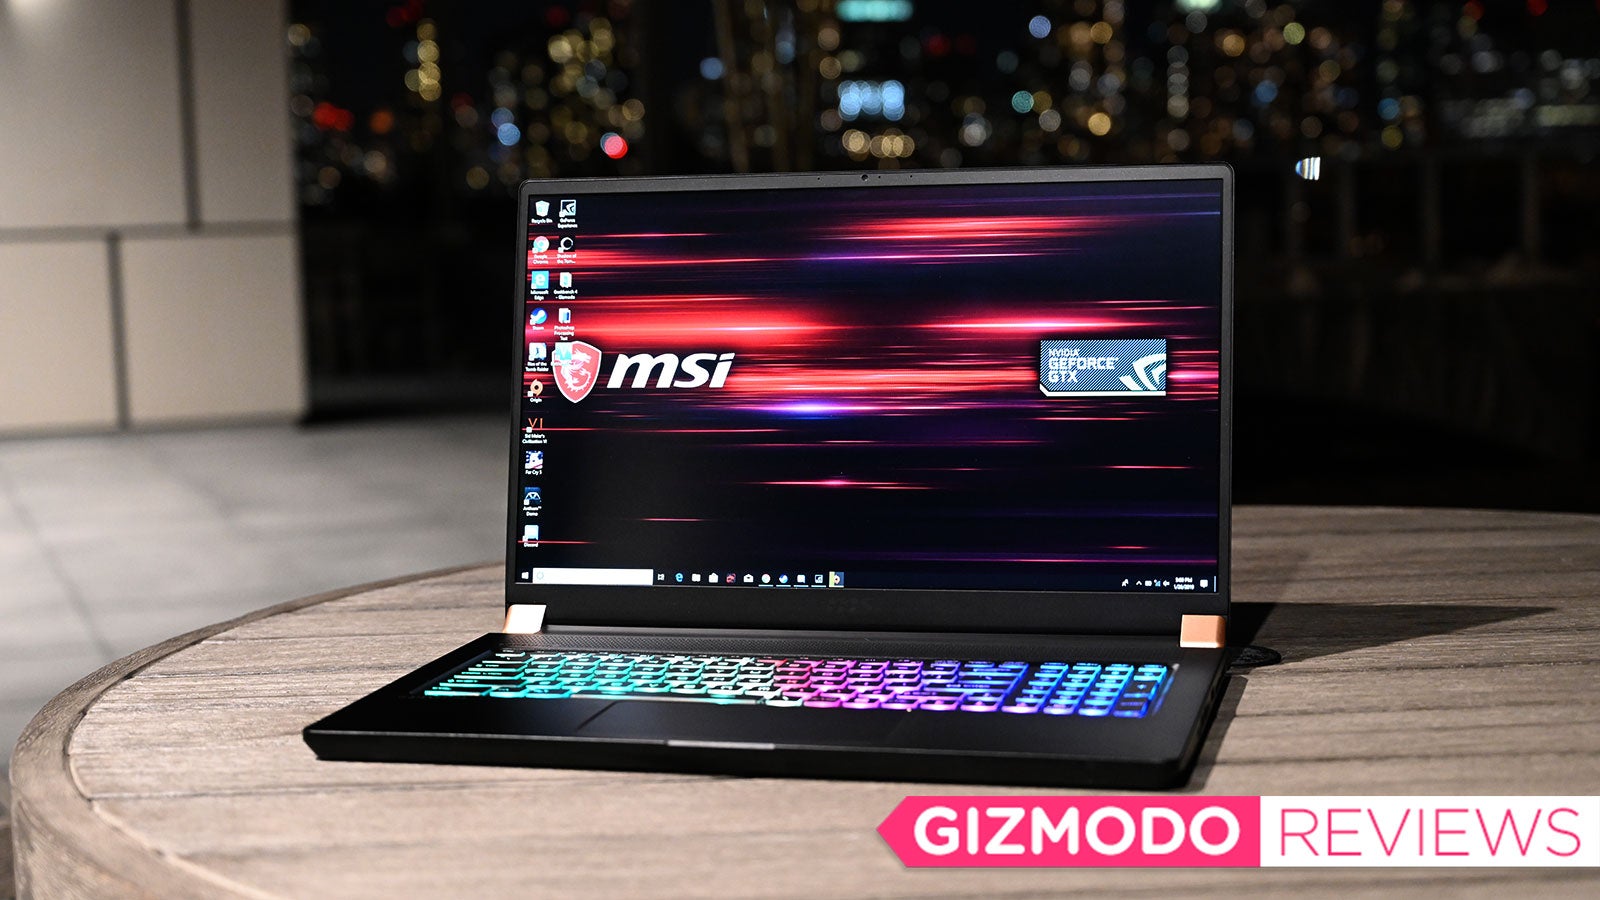 MSI’s GS75 Proves Powerful Gaming Laptops Don’t Need All That Bulk